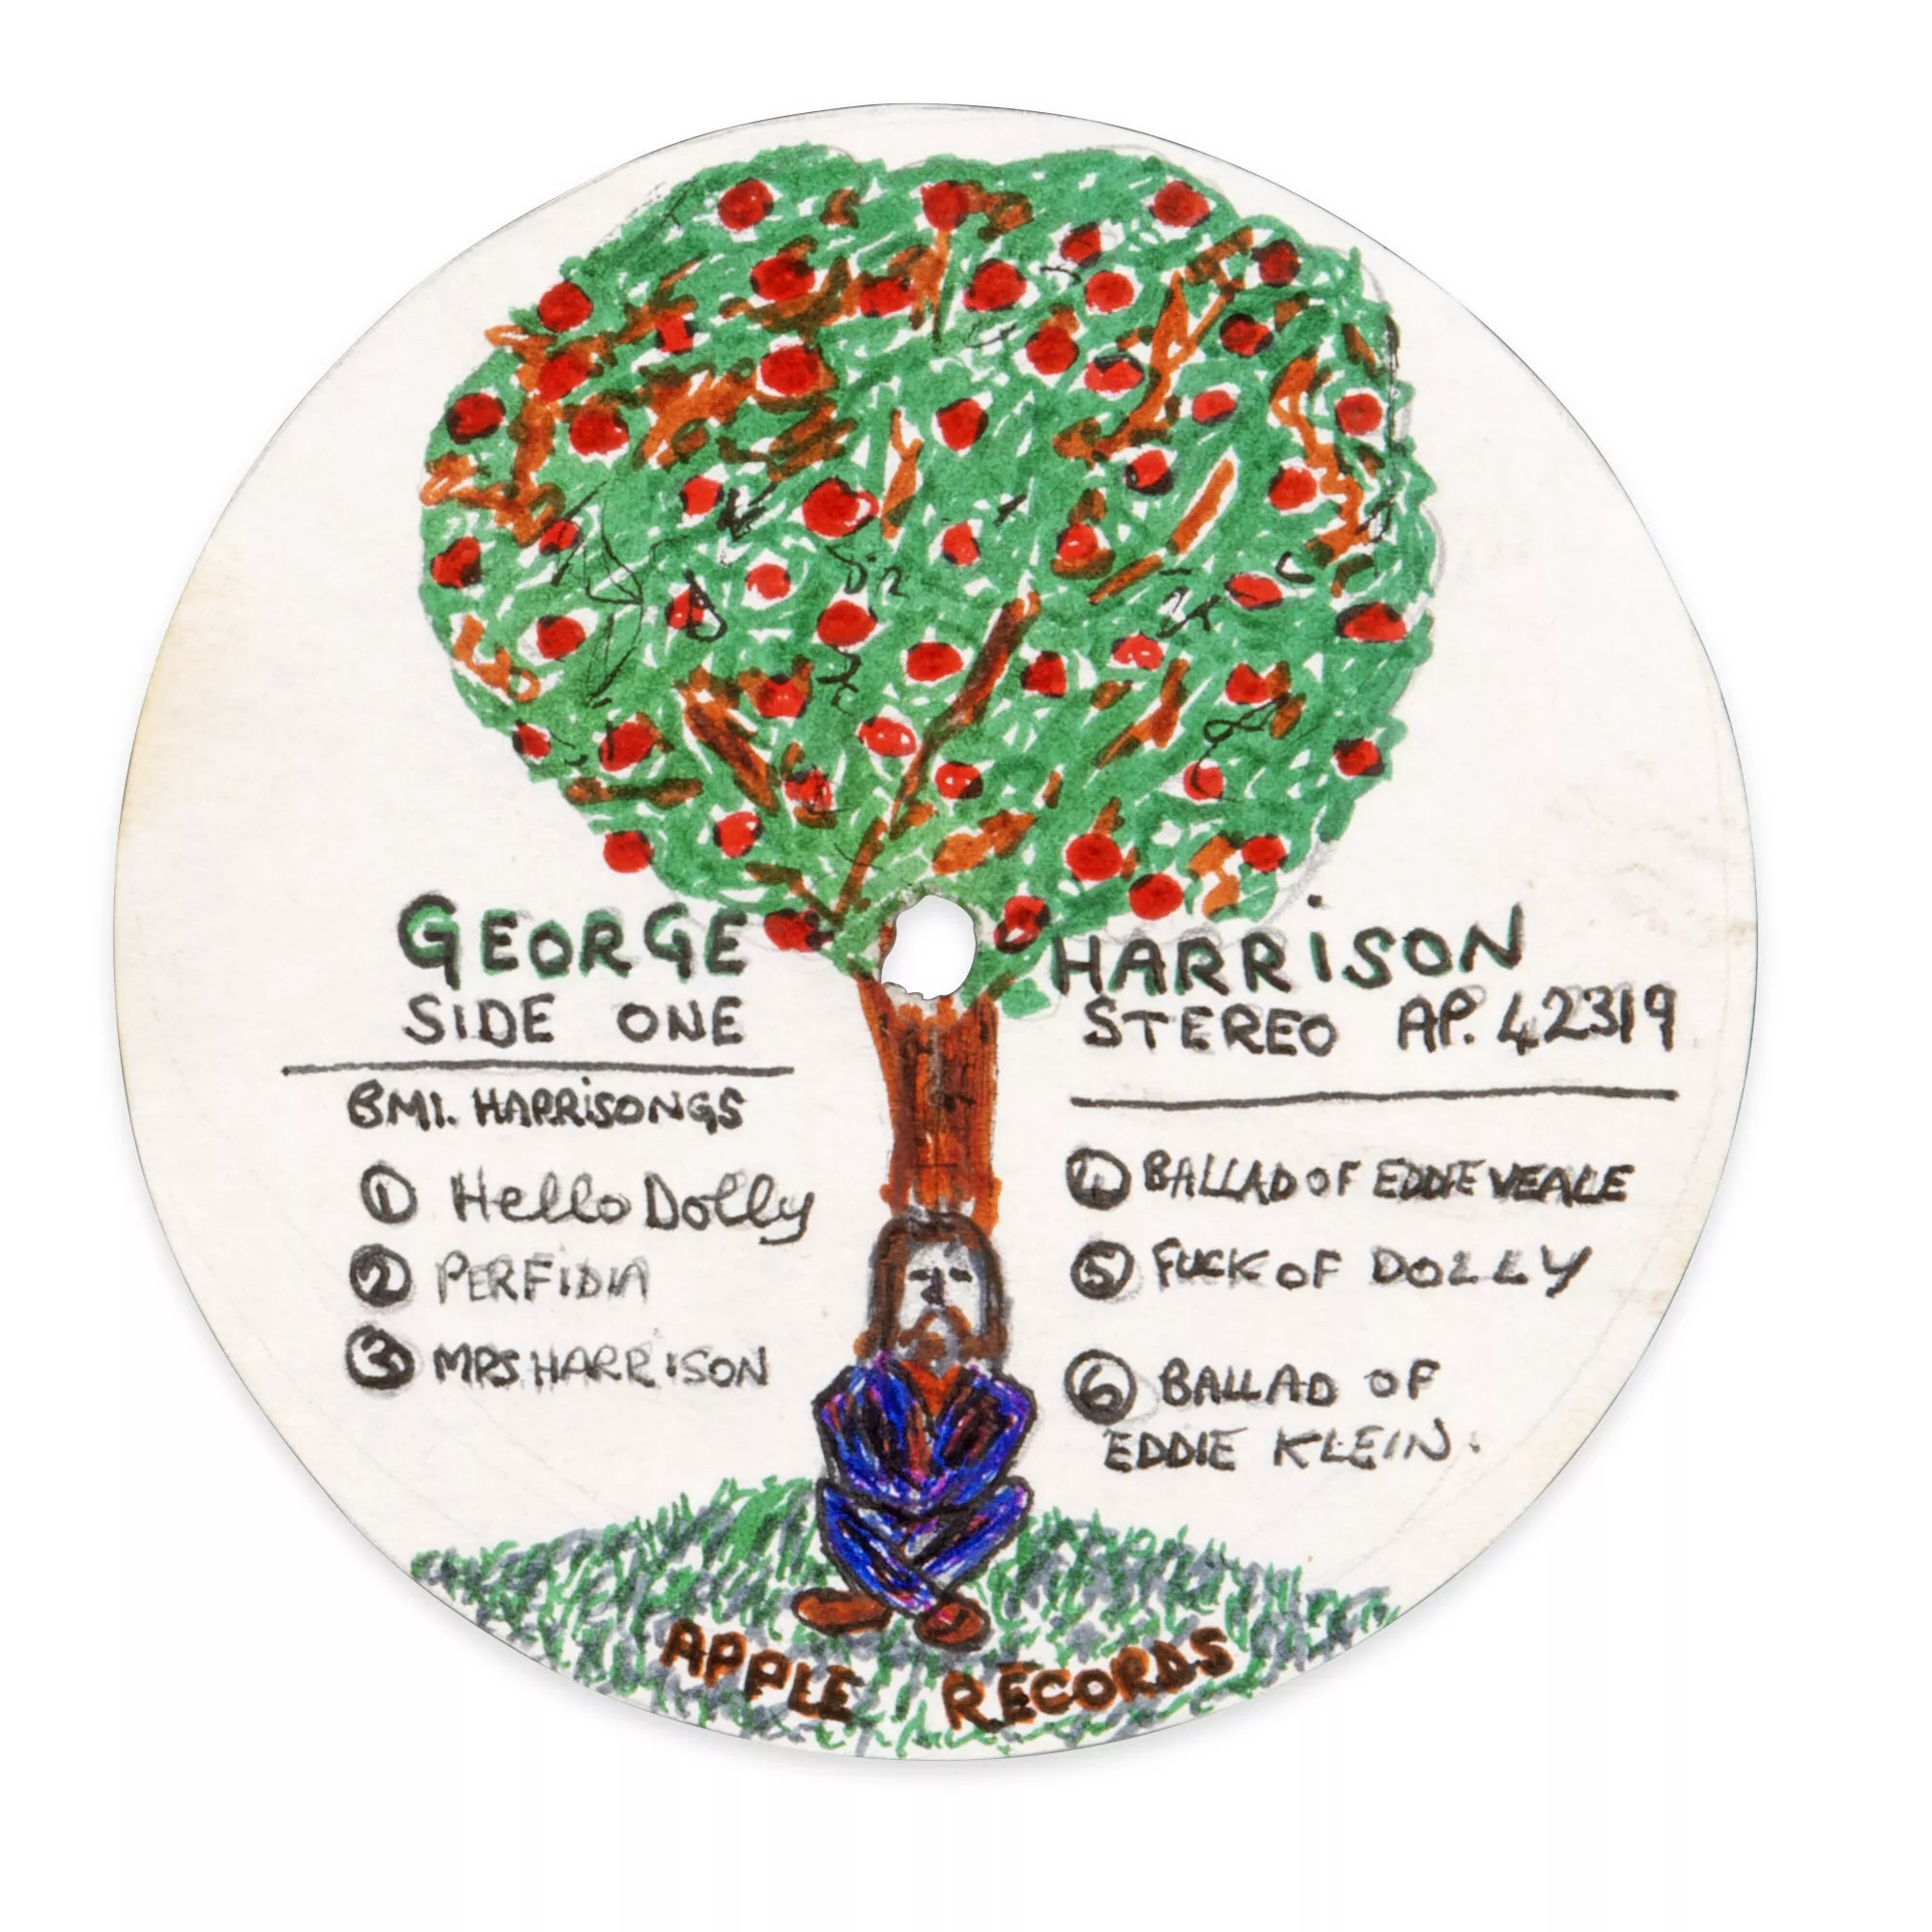 Christie's Pattie Boyd Collection - George Harrison CD Cover